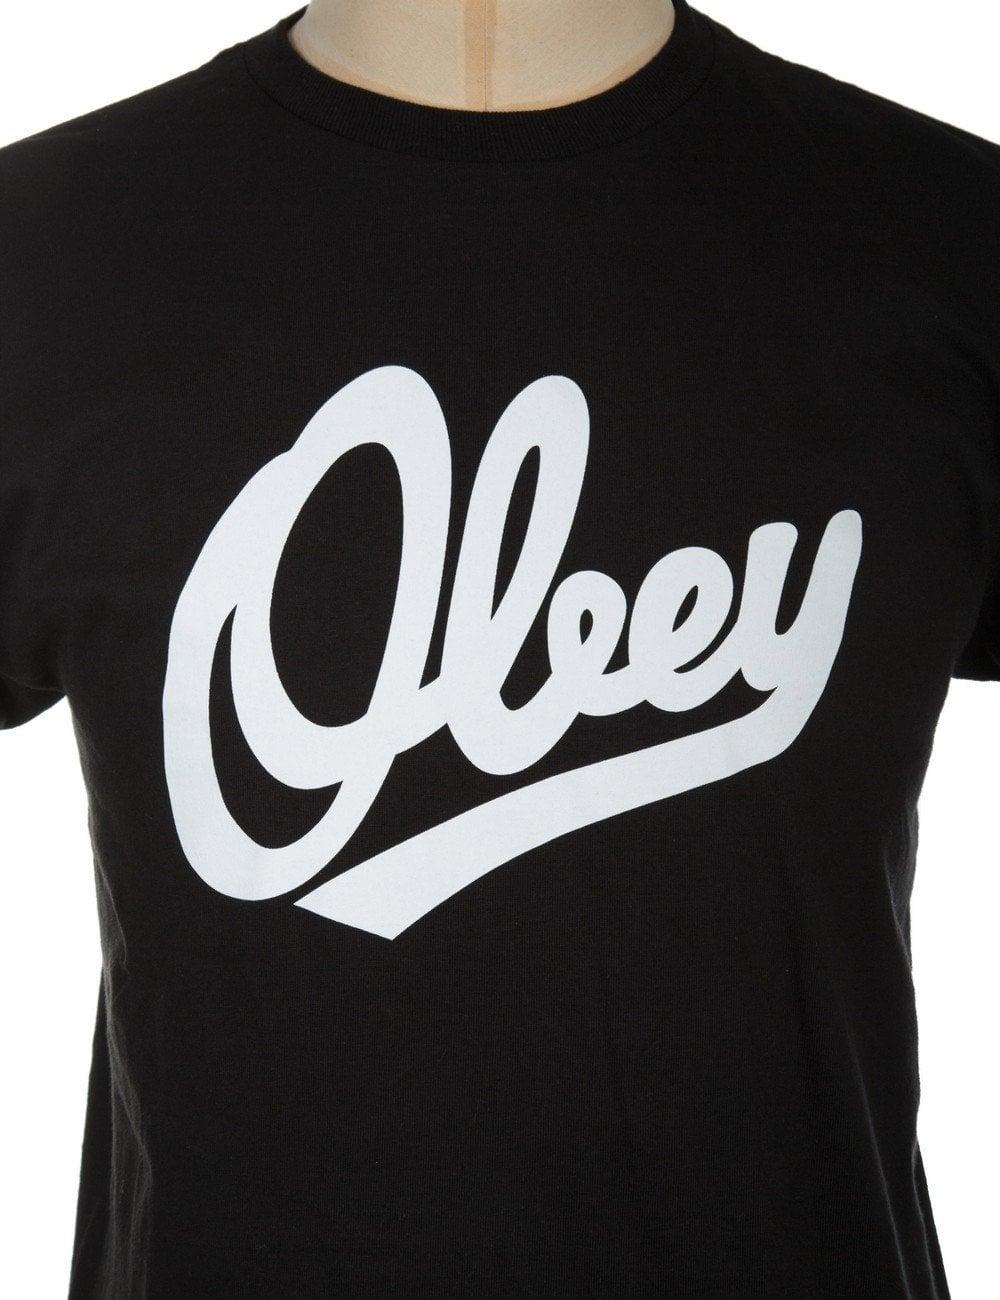 Team Obey Logo - Obey Clothing Team Obey T-shirt - Black - Clothing from Fat Buddha ...